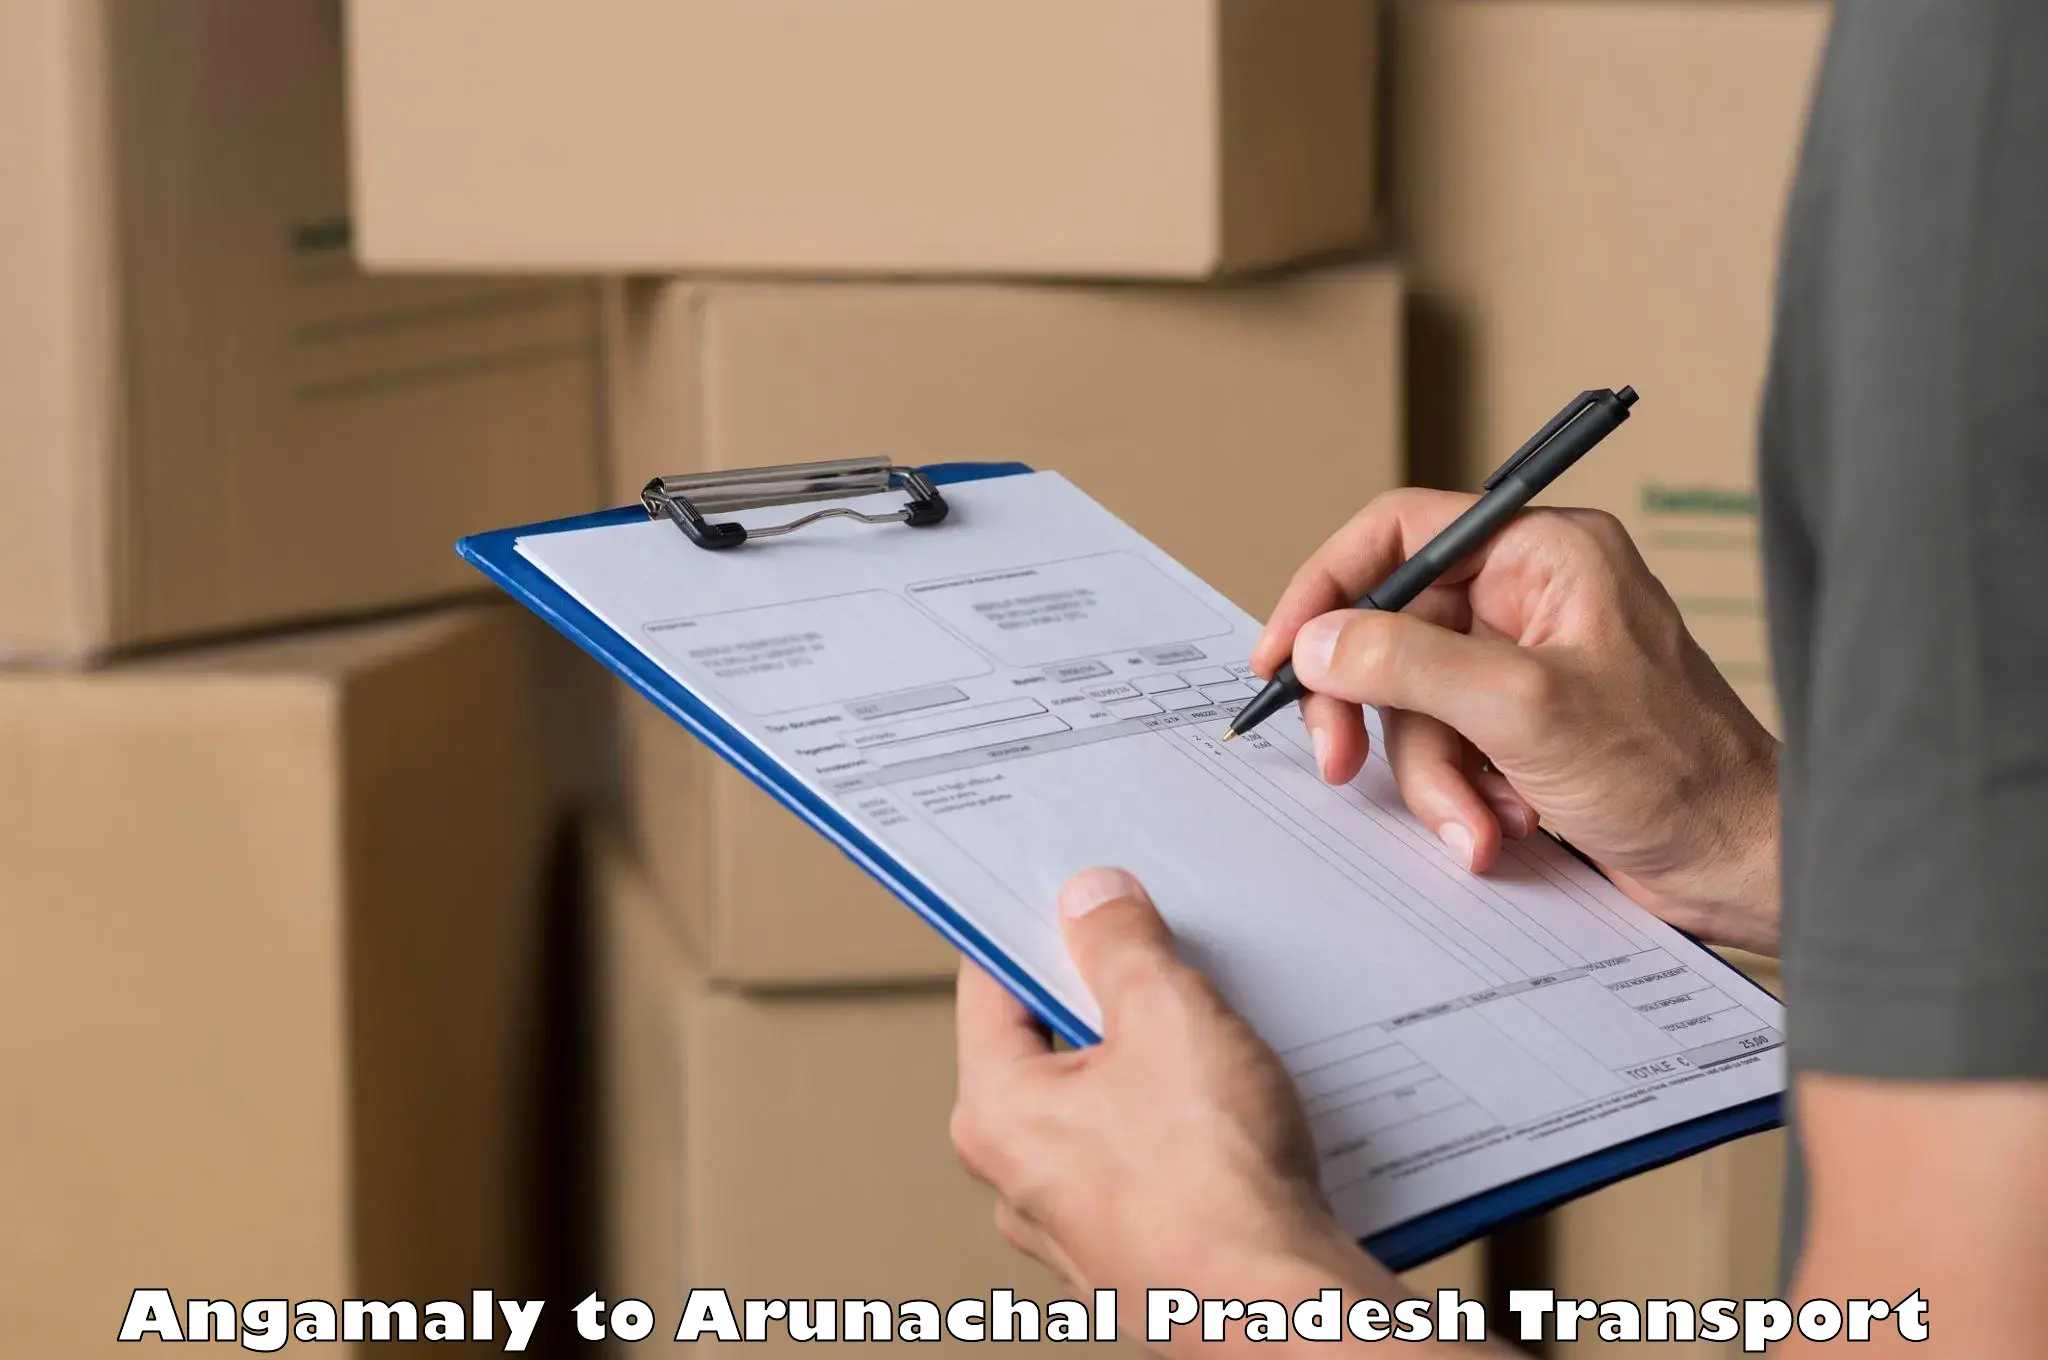 Truck transport companies in India in Angamaly to Roing